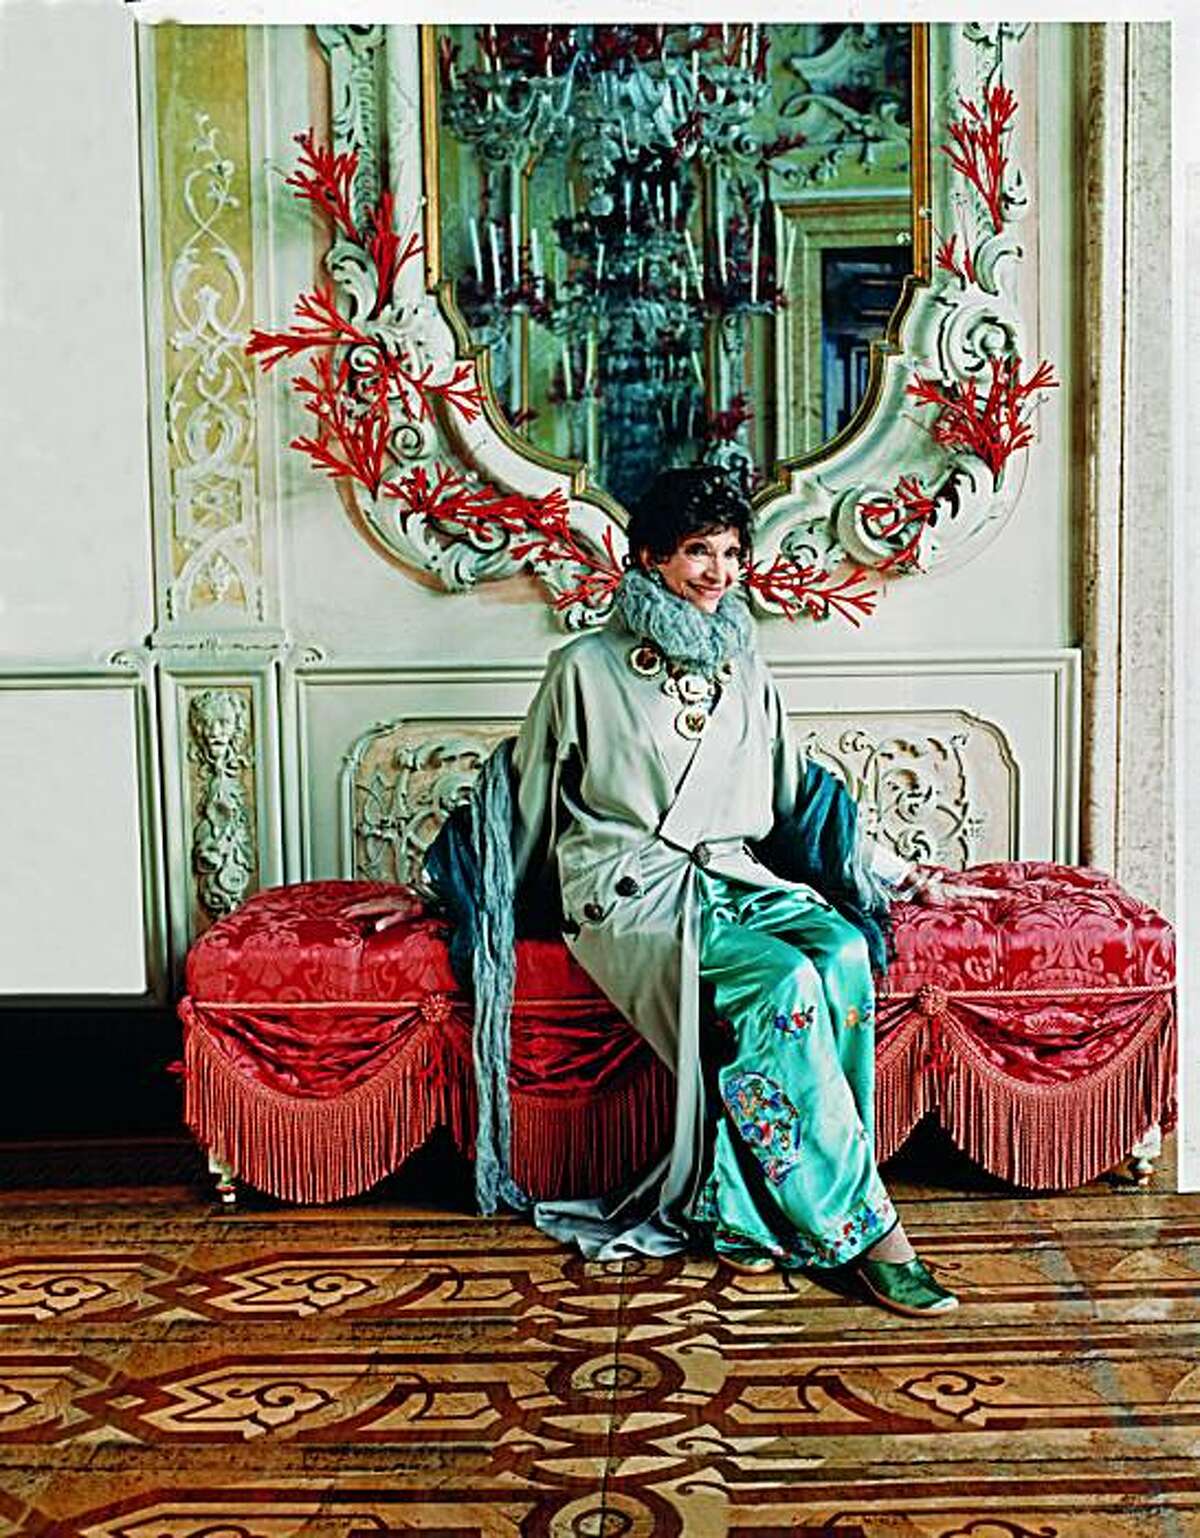 International hostess and fashionista Dodie Rosekrans and her late husband, John Rosekrans, had the late interior designer Tony Duquette and his design partner, Hutton Wilkinson, transform a palazzo on Venice, Italy's Grand Canal into a fantasy palace. Here, Dodie sits under a mirror adorned with coral "antlers" in the ballroom. She is wearing Galliano haute couture. The home is featured in the new book, "At Home with Town & Country," (Hearst Books, 2010.) Reprinted with permission from At Home with Town & Country, copyright 2010 by Hearst Books, a division of Sterling Publishing Co., Inc.”